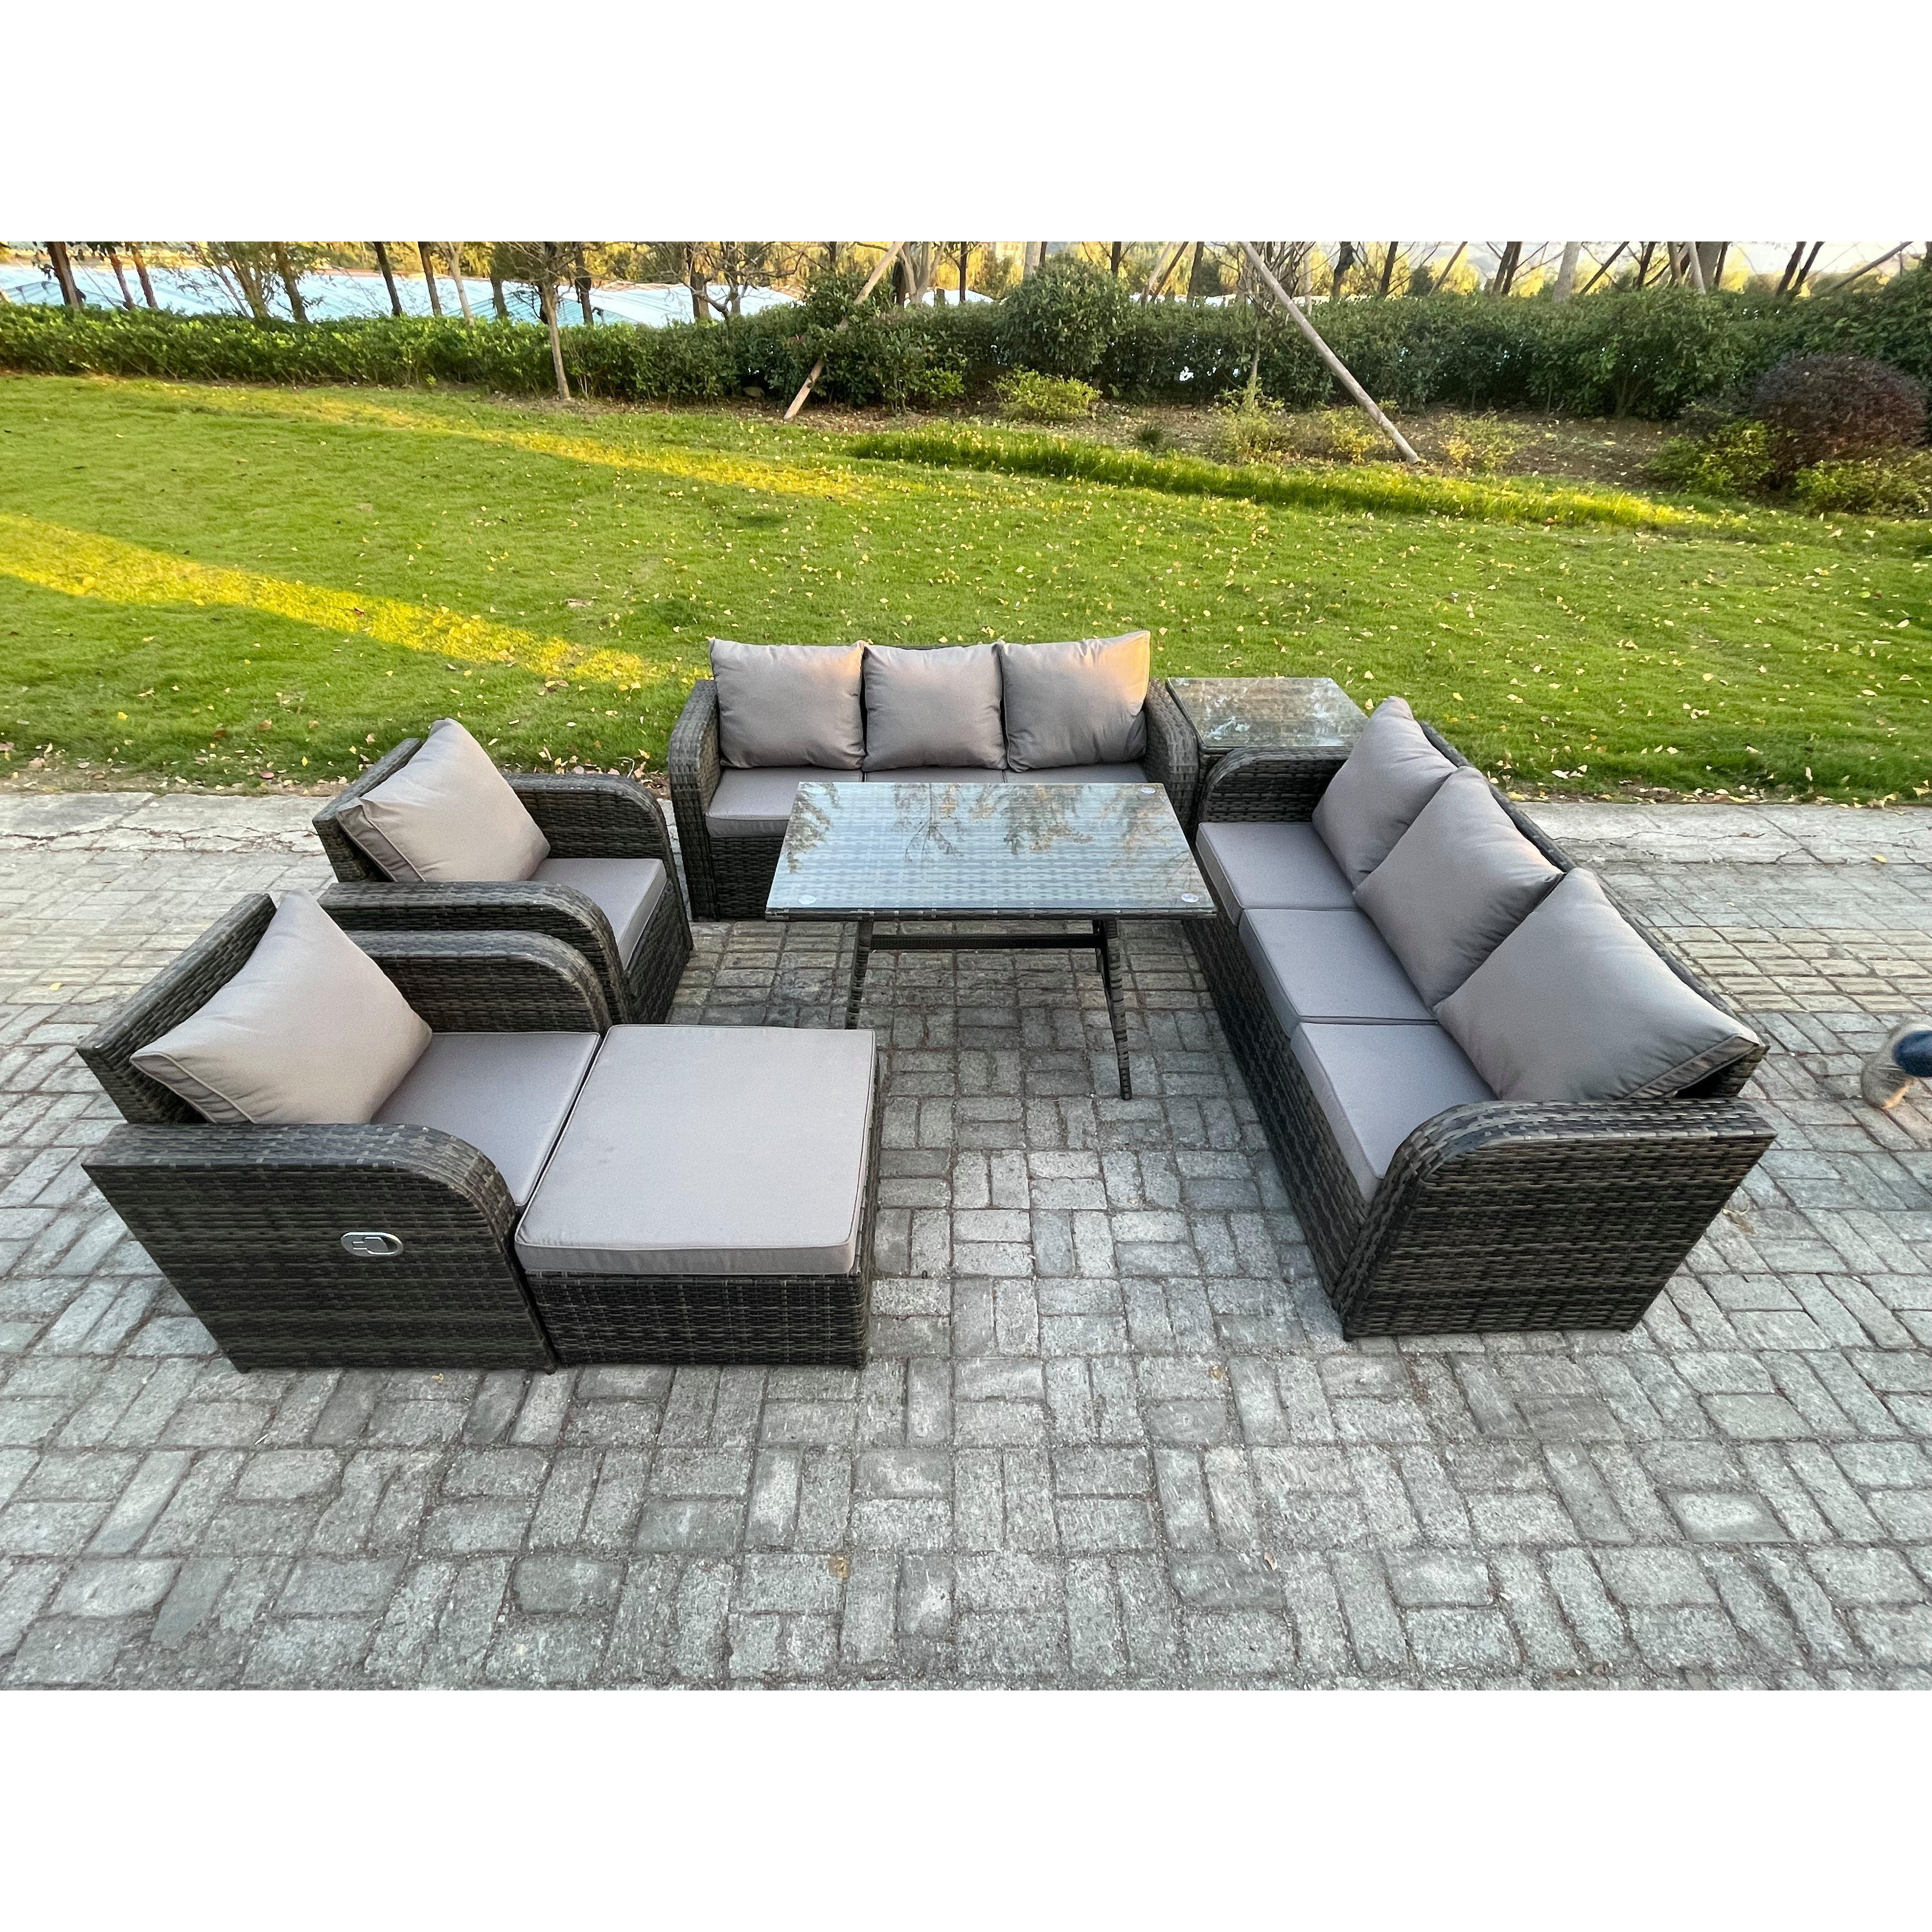 Rattan Outdoor Garden Furniture Sofa Set Patio Table & Chairs Set with 3 Seater Sofa Rectangular Dining Table - image 1